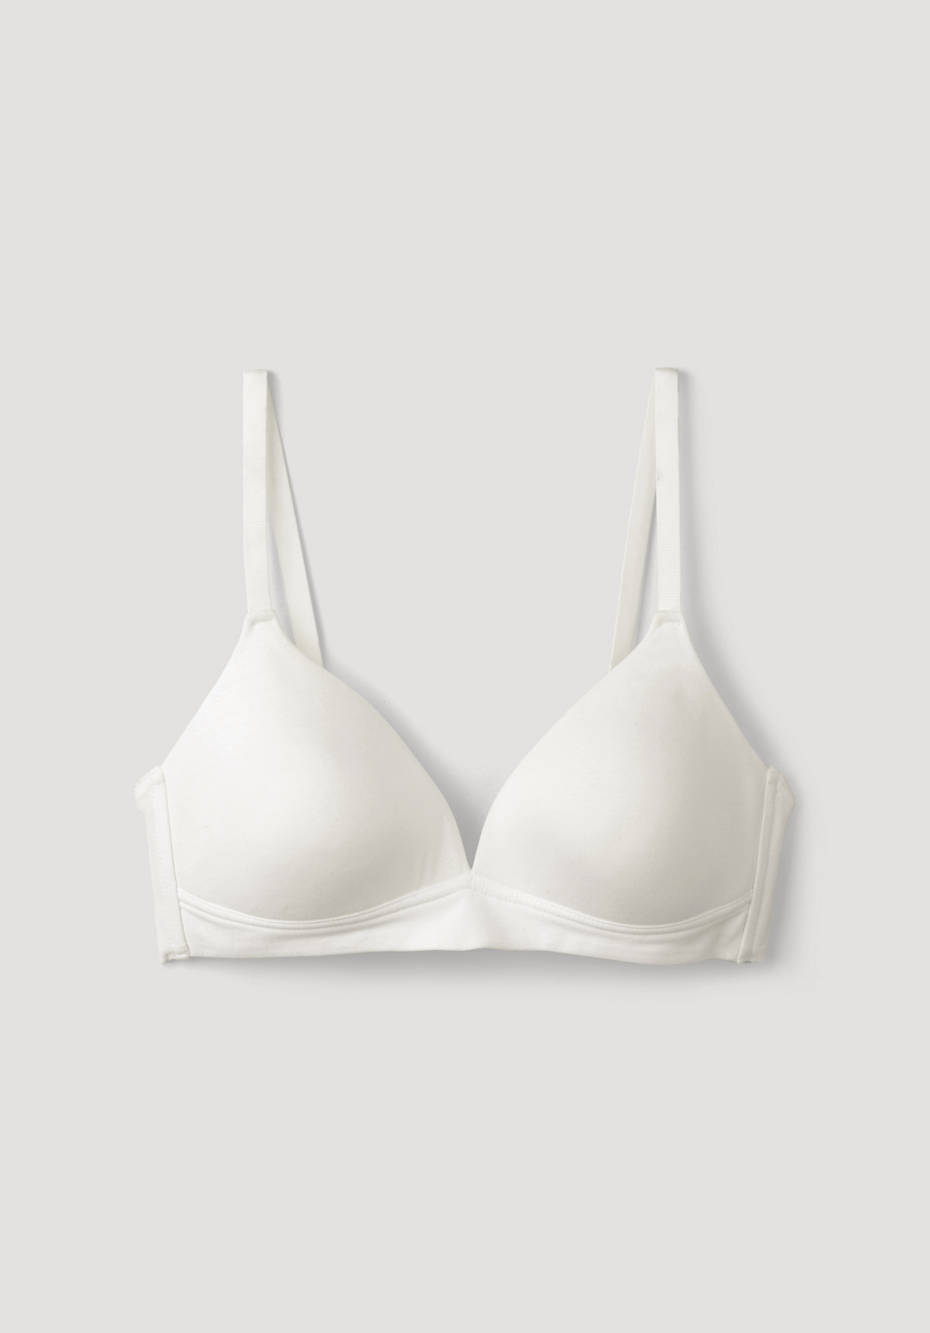 Metal-free spacer bra made of organic cotton and TENCEL ™ Modal